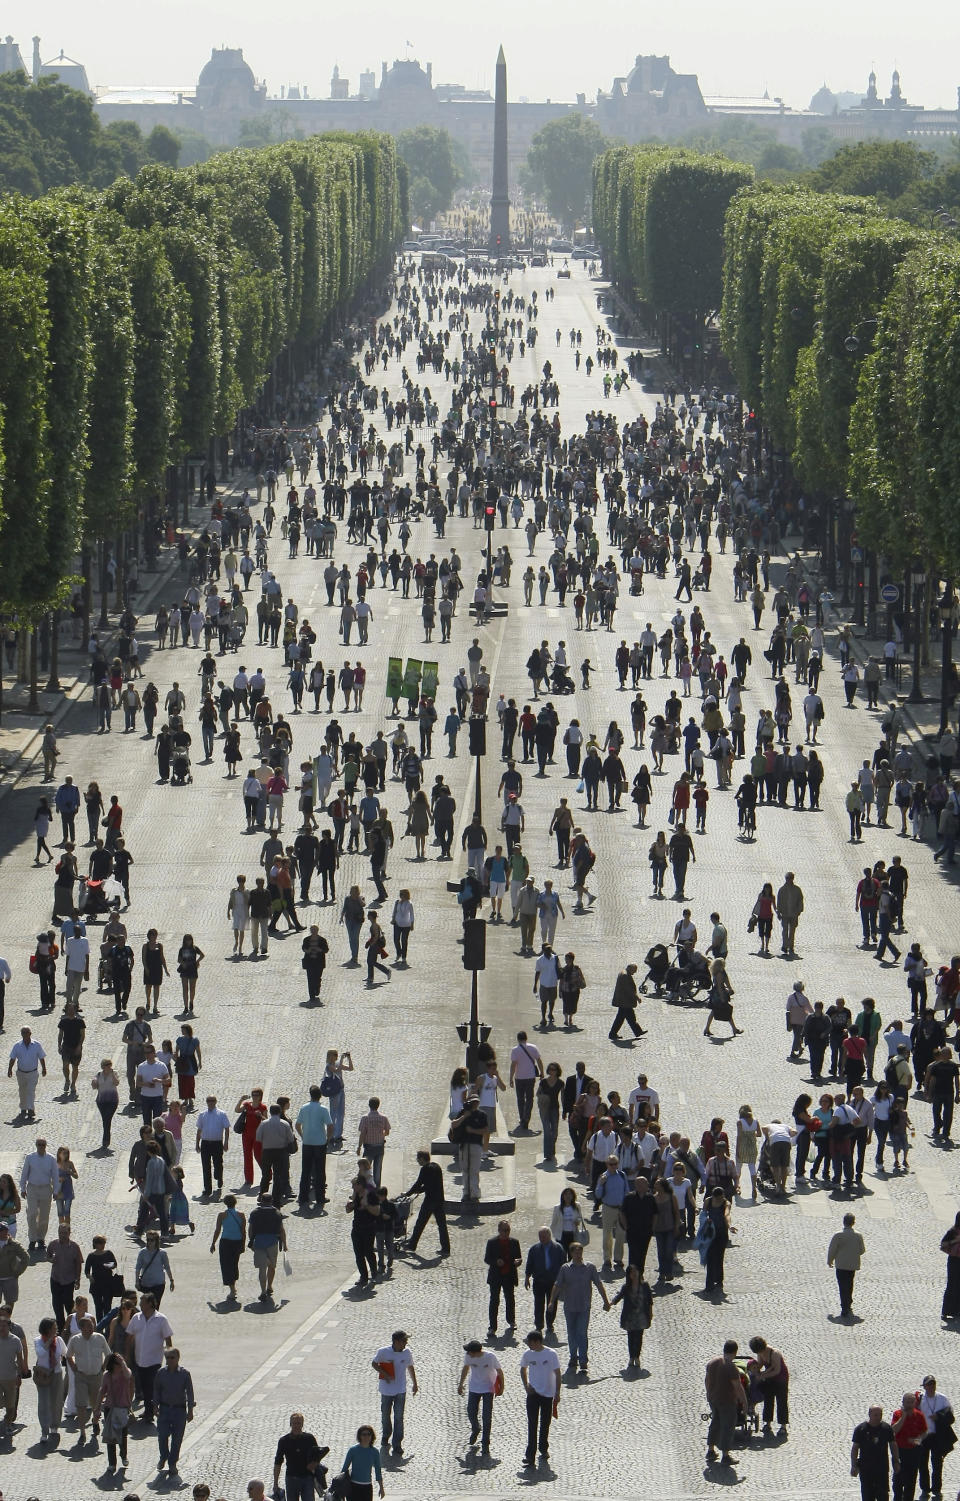 FILE- Visitors walk towards planted fields on the Champs Elysees near the "Place de la Concorde" (Concorde's square) monument in Paris, Sunday, May 23, 2010. Some 4,400 of the world's best athletes, parading down France's most famous boulevard with their prosthetic limbs, mobility chairs and stories of adversities overcome, to a grand celebration of their prowess and sports on the Paris square where the French revolutionaries of 1789 chopped off heads. (AP Photo/Jacques Brinon, File)